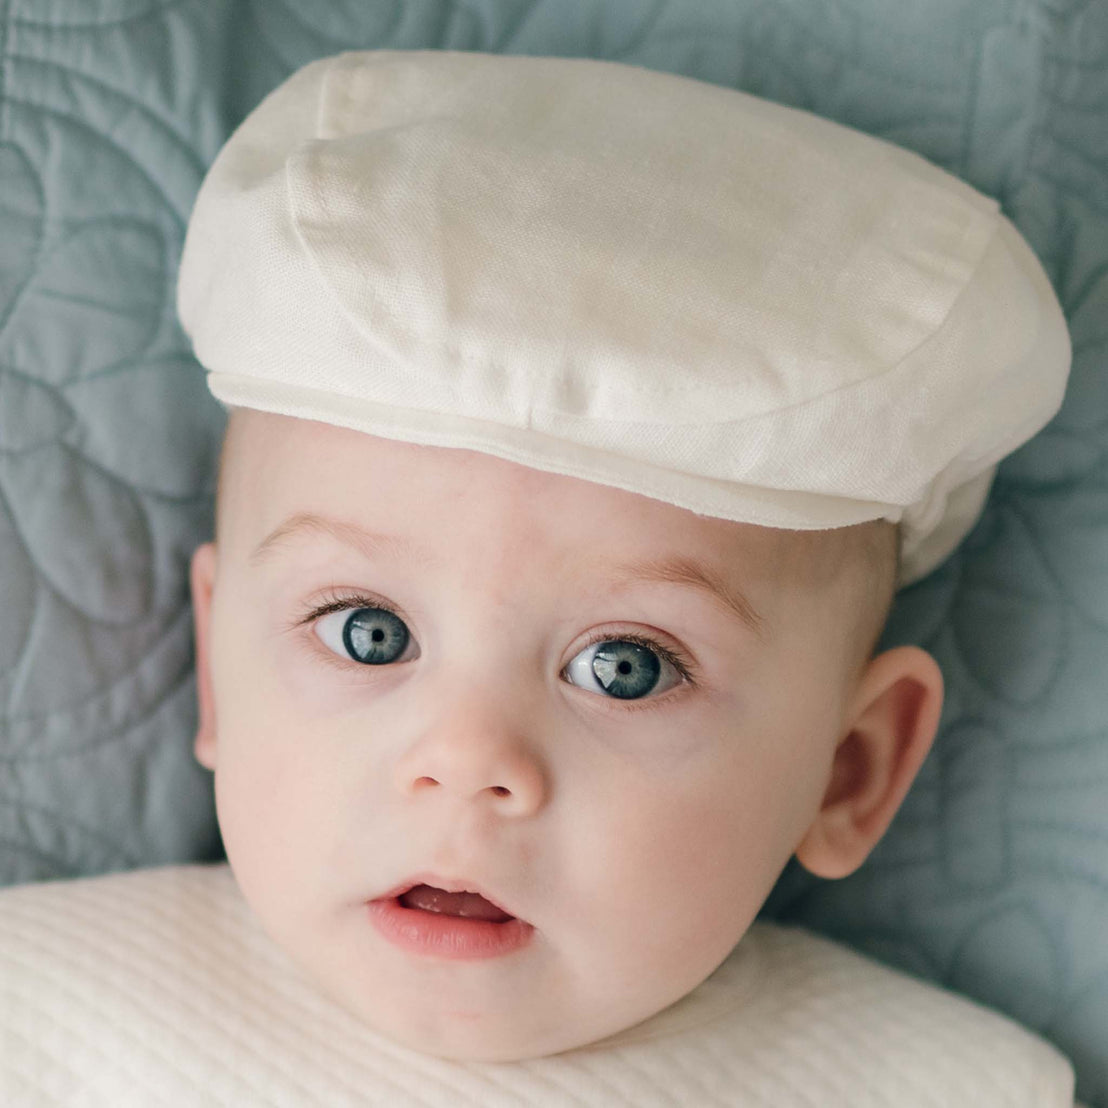 A close-up of a baby wearing an Owen Linen Newsboy Cap, with bright blue eyes and a slight open mouth, looking directly at the camera against a textured teal background.